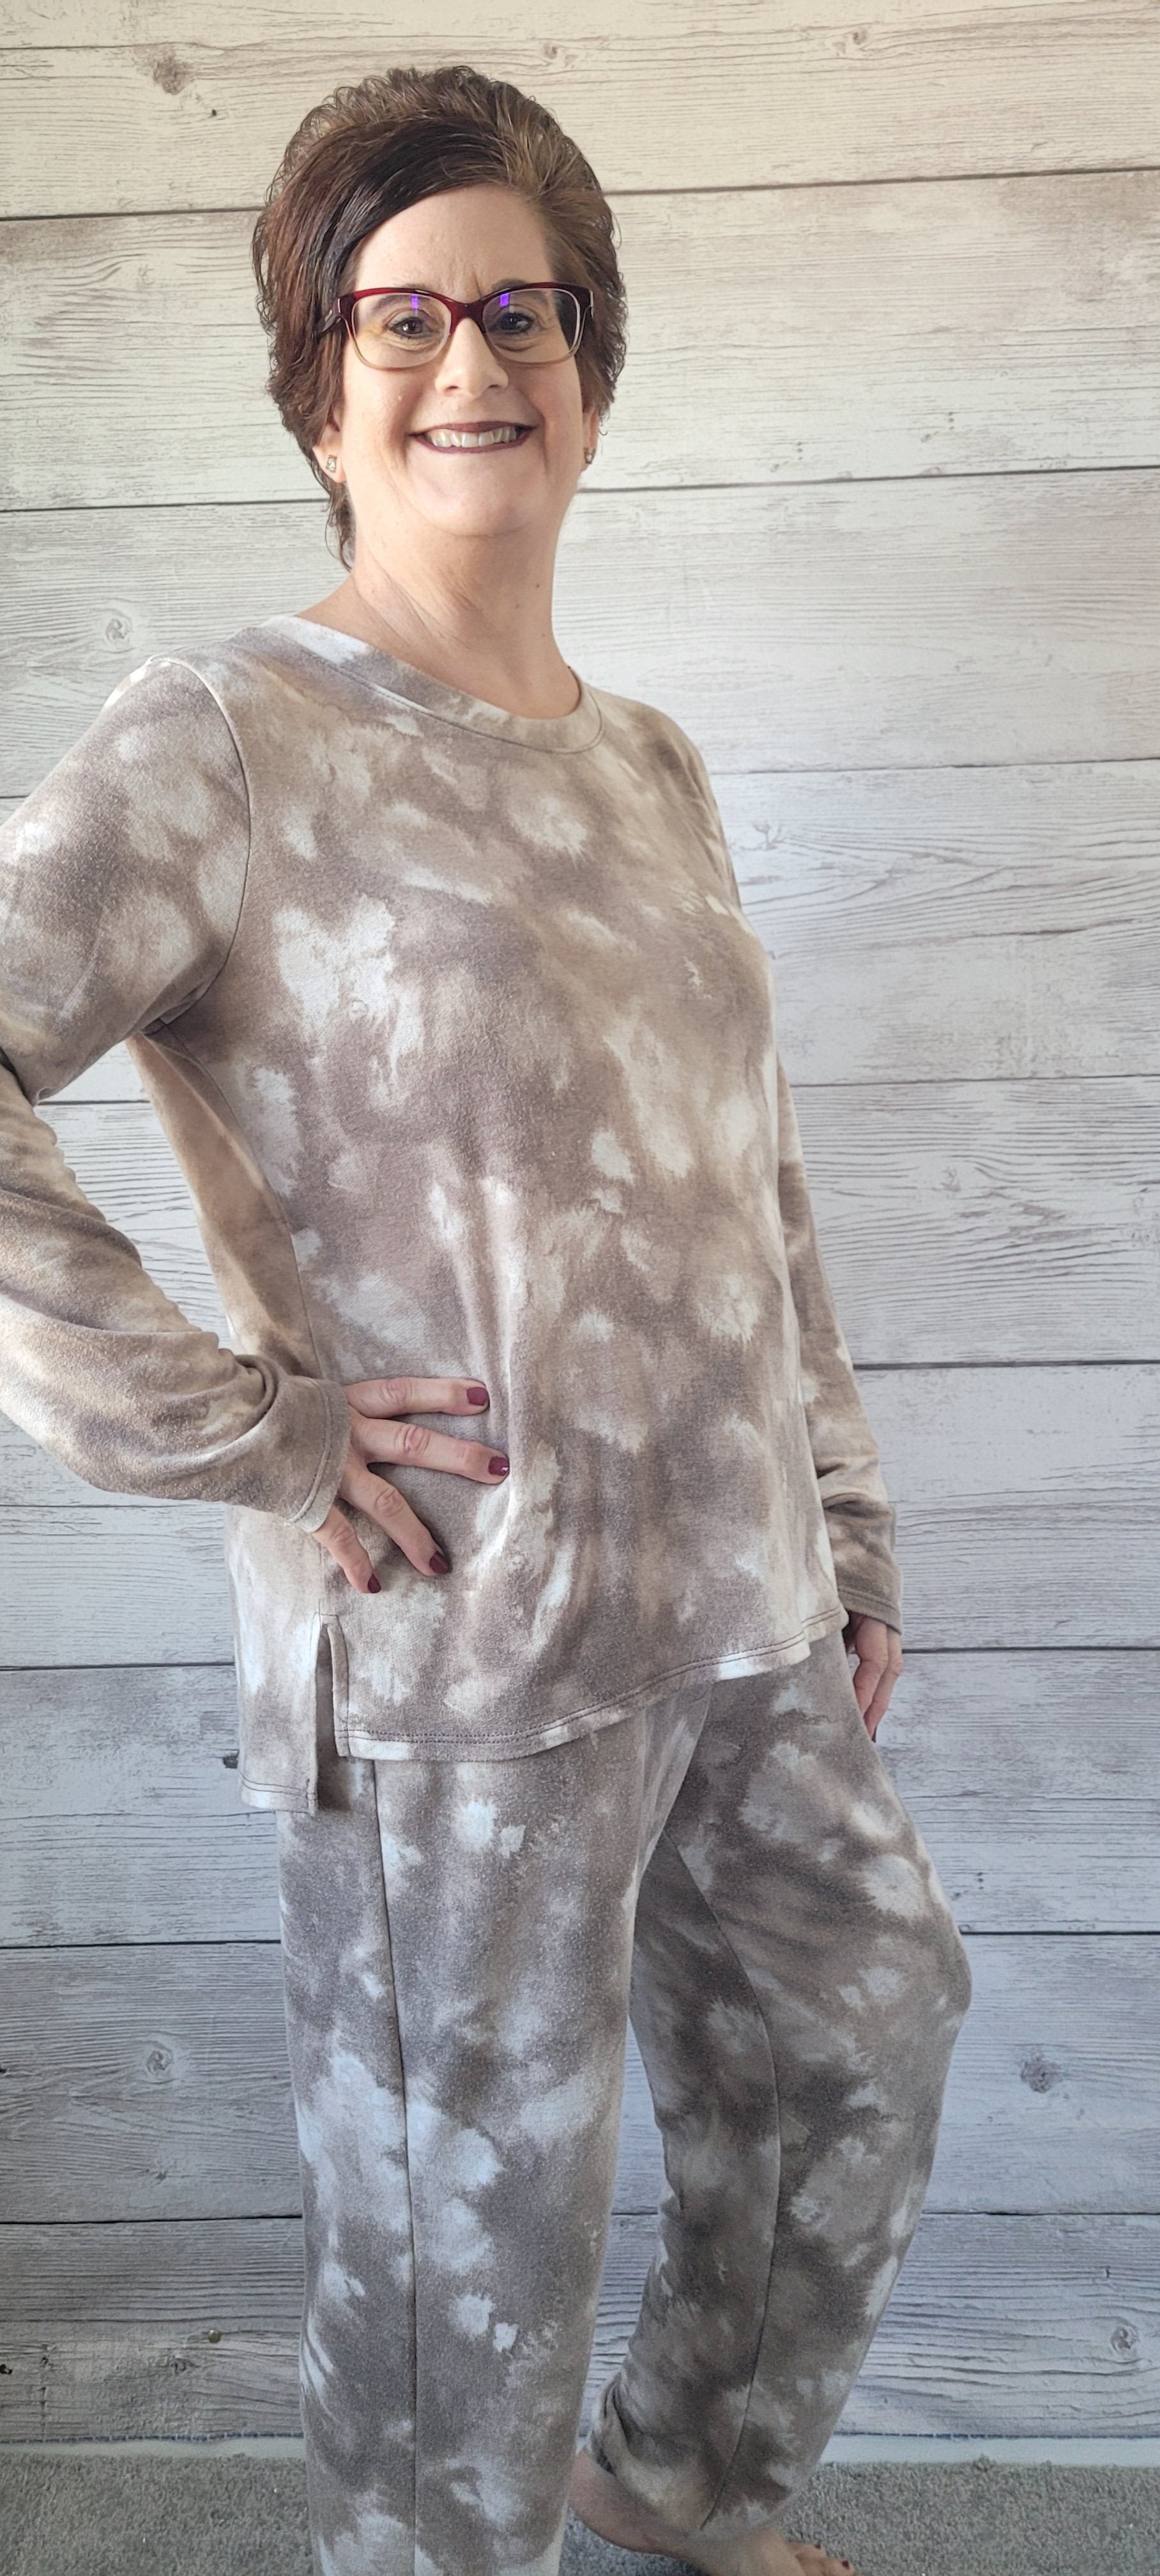 Rock this season in style! Our Daniela Mocha Tie Dye Lounge Set is crafted with delightful french terry fabric for a comfortable look. The pullover has a rounded neckline and eye-catching side slits detail, while the jogger pants feature double pocket details and a waist drawstring. Perfect for lounging or running around town. Slip into something more you! Sizes small through large.